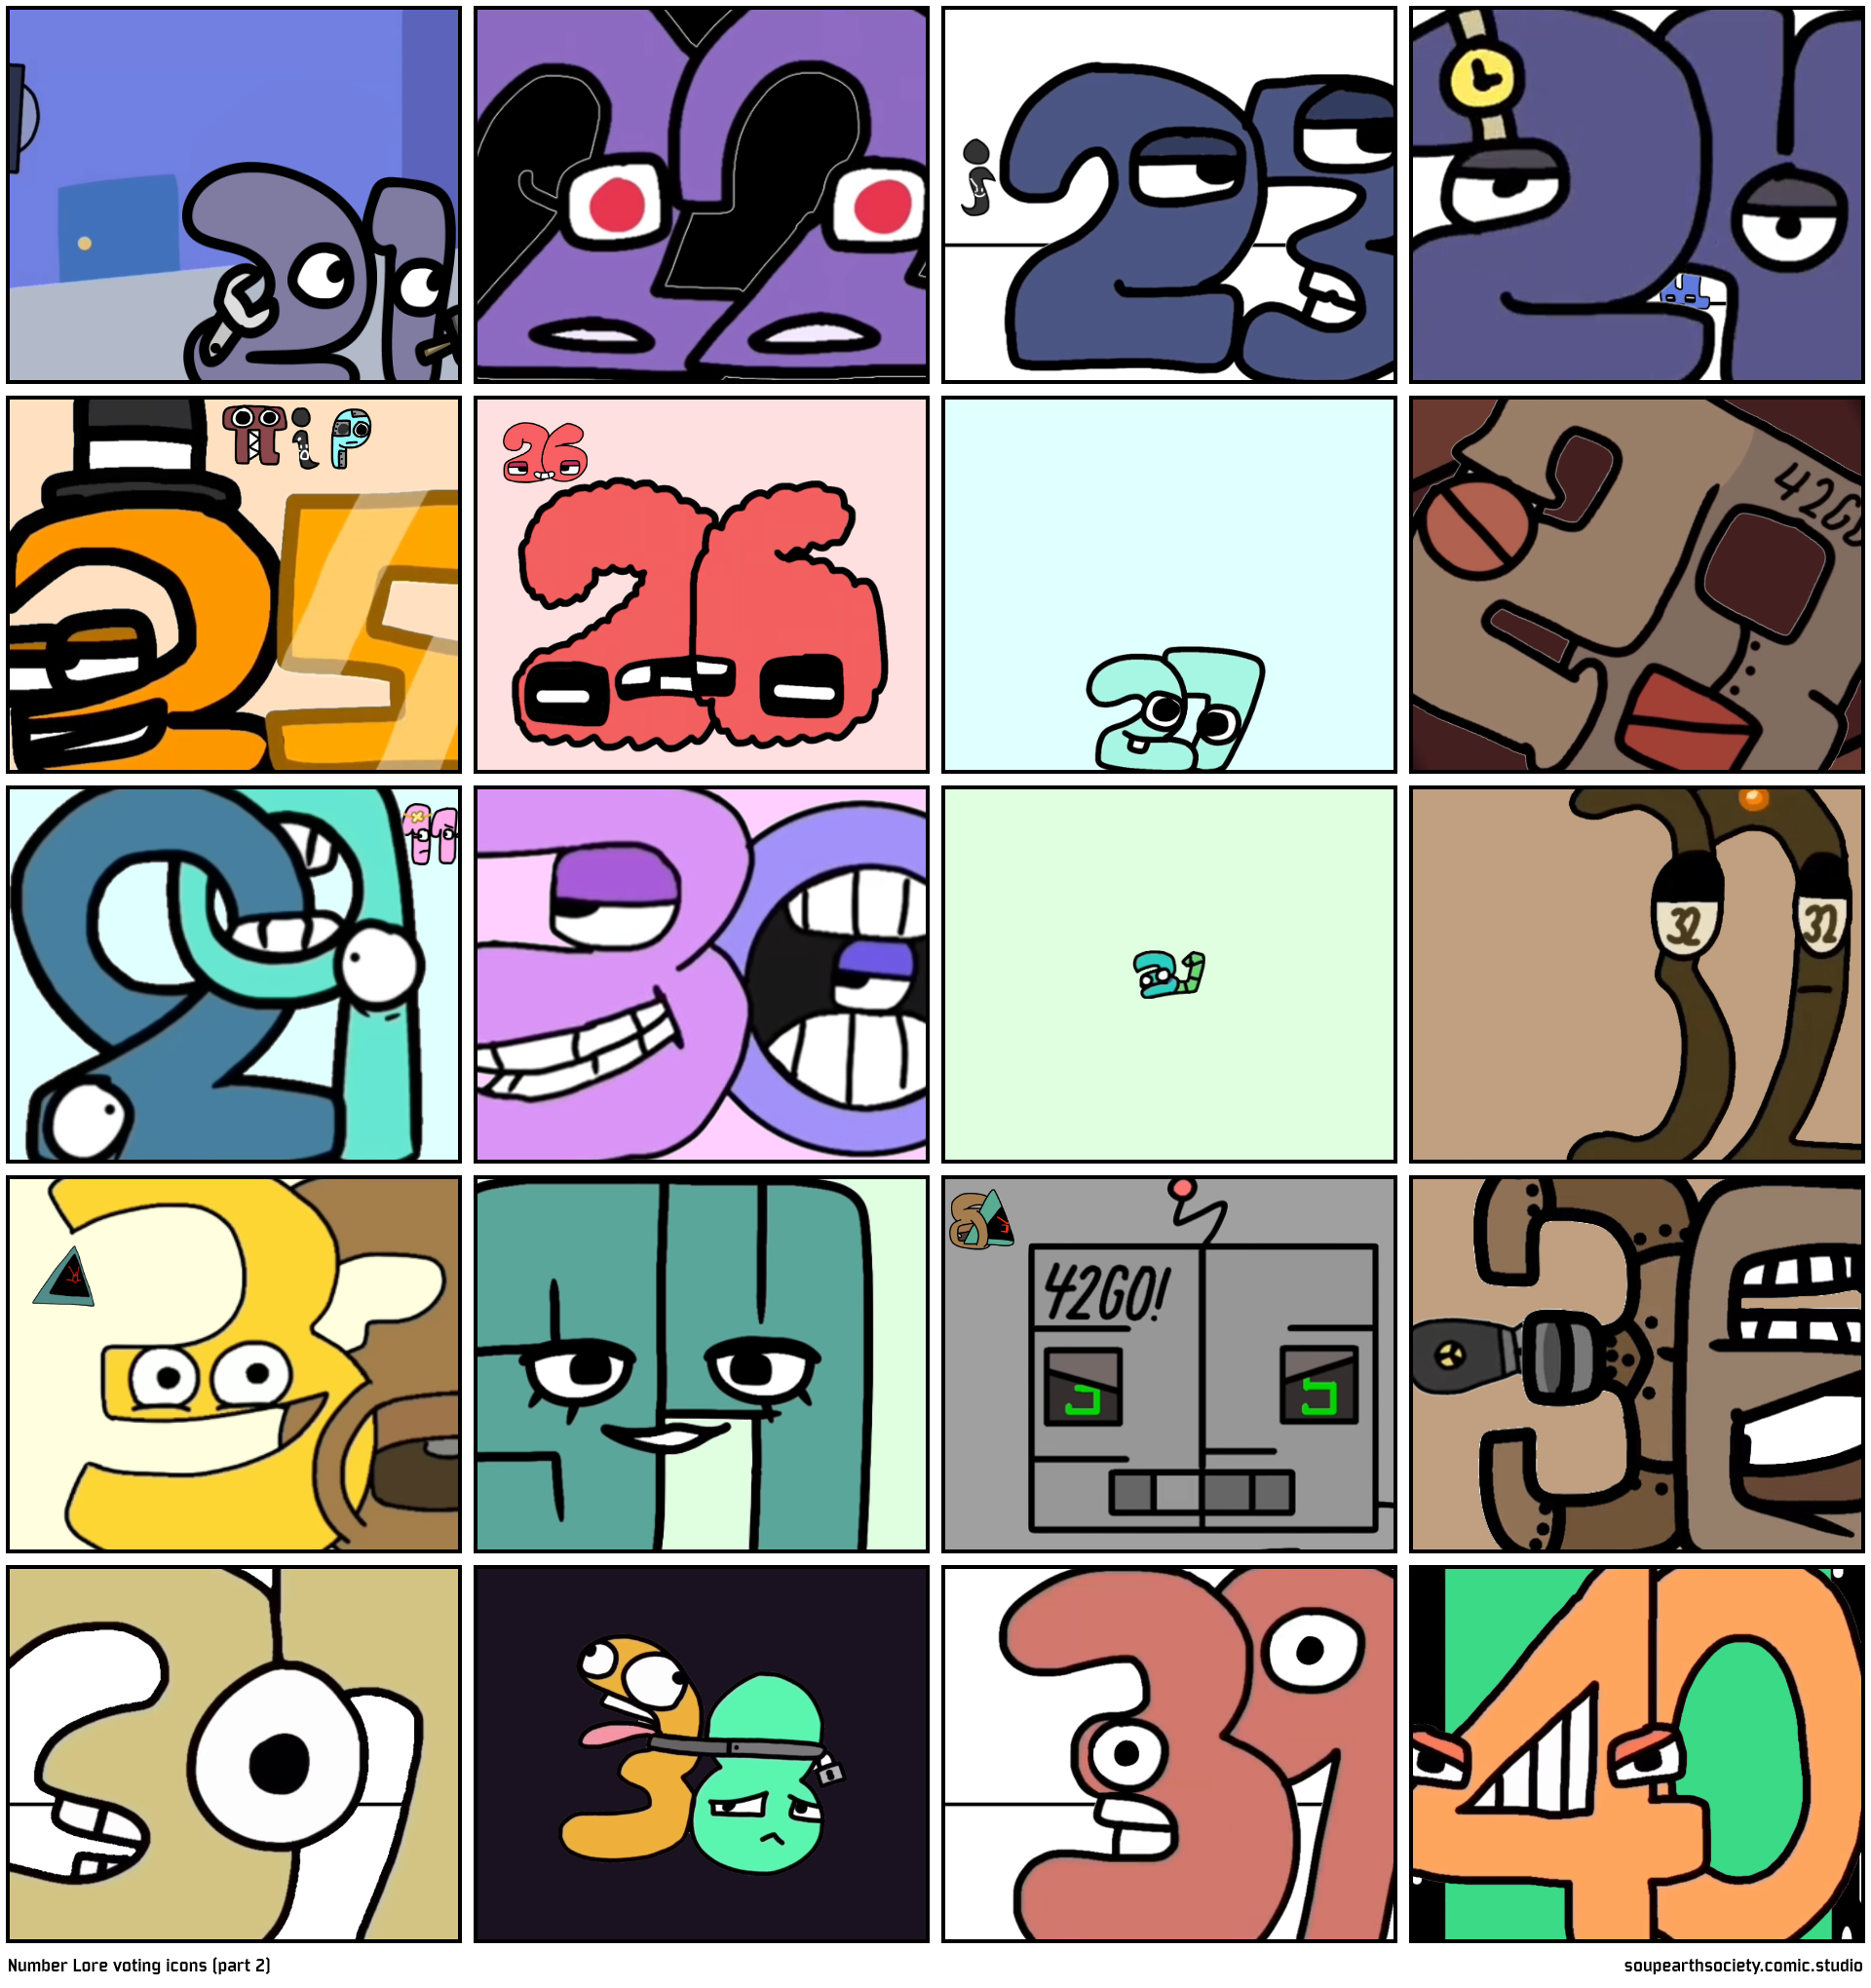 Number Lore voting icons (part 2)